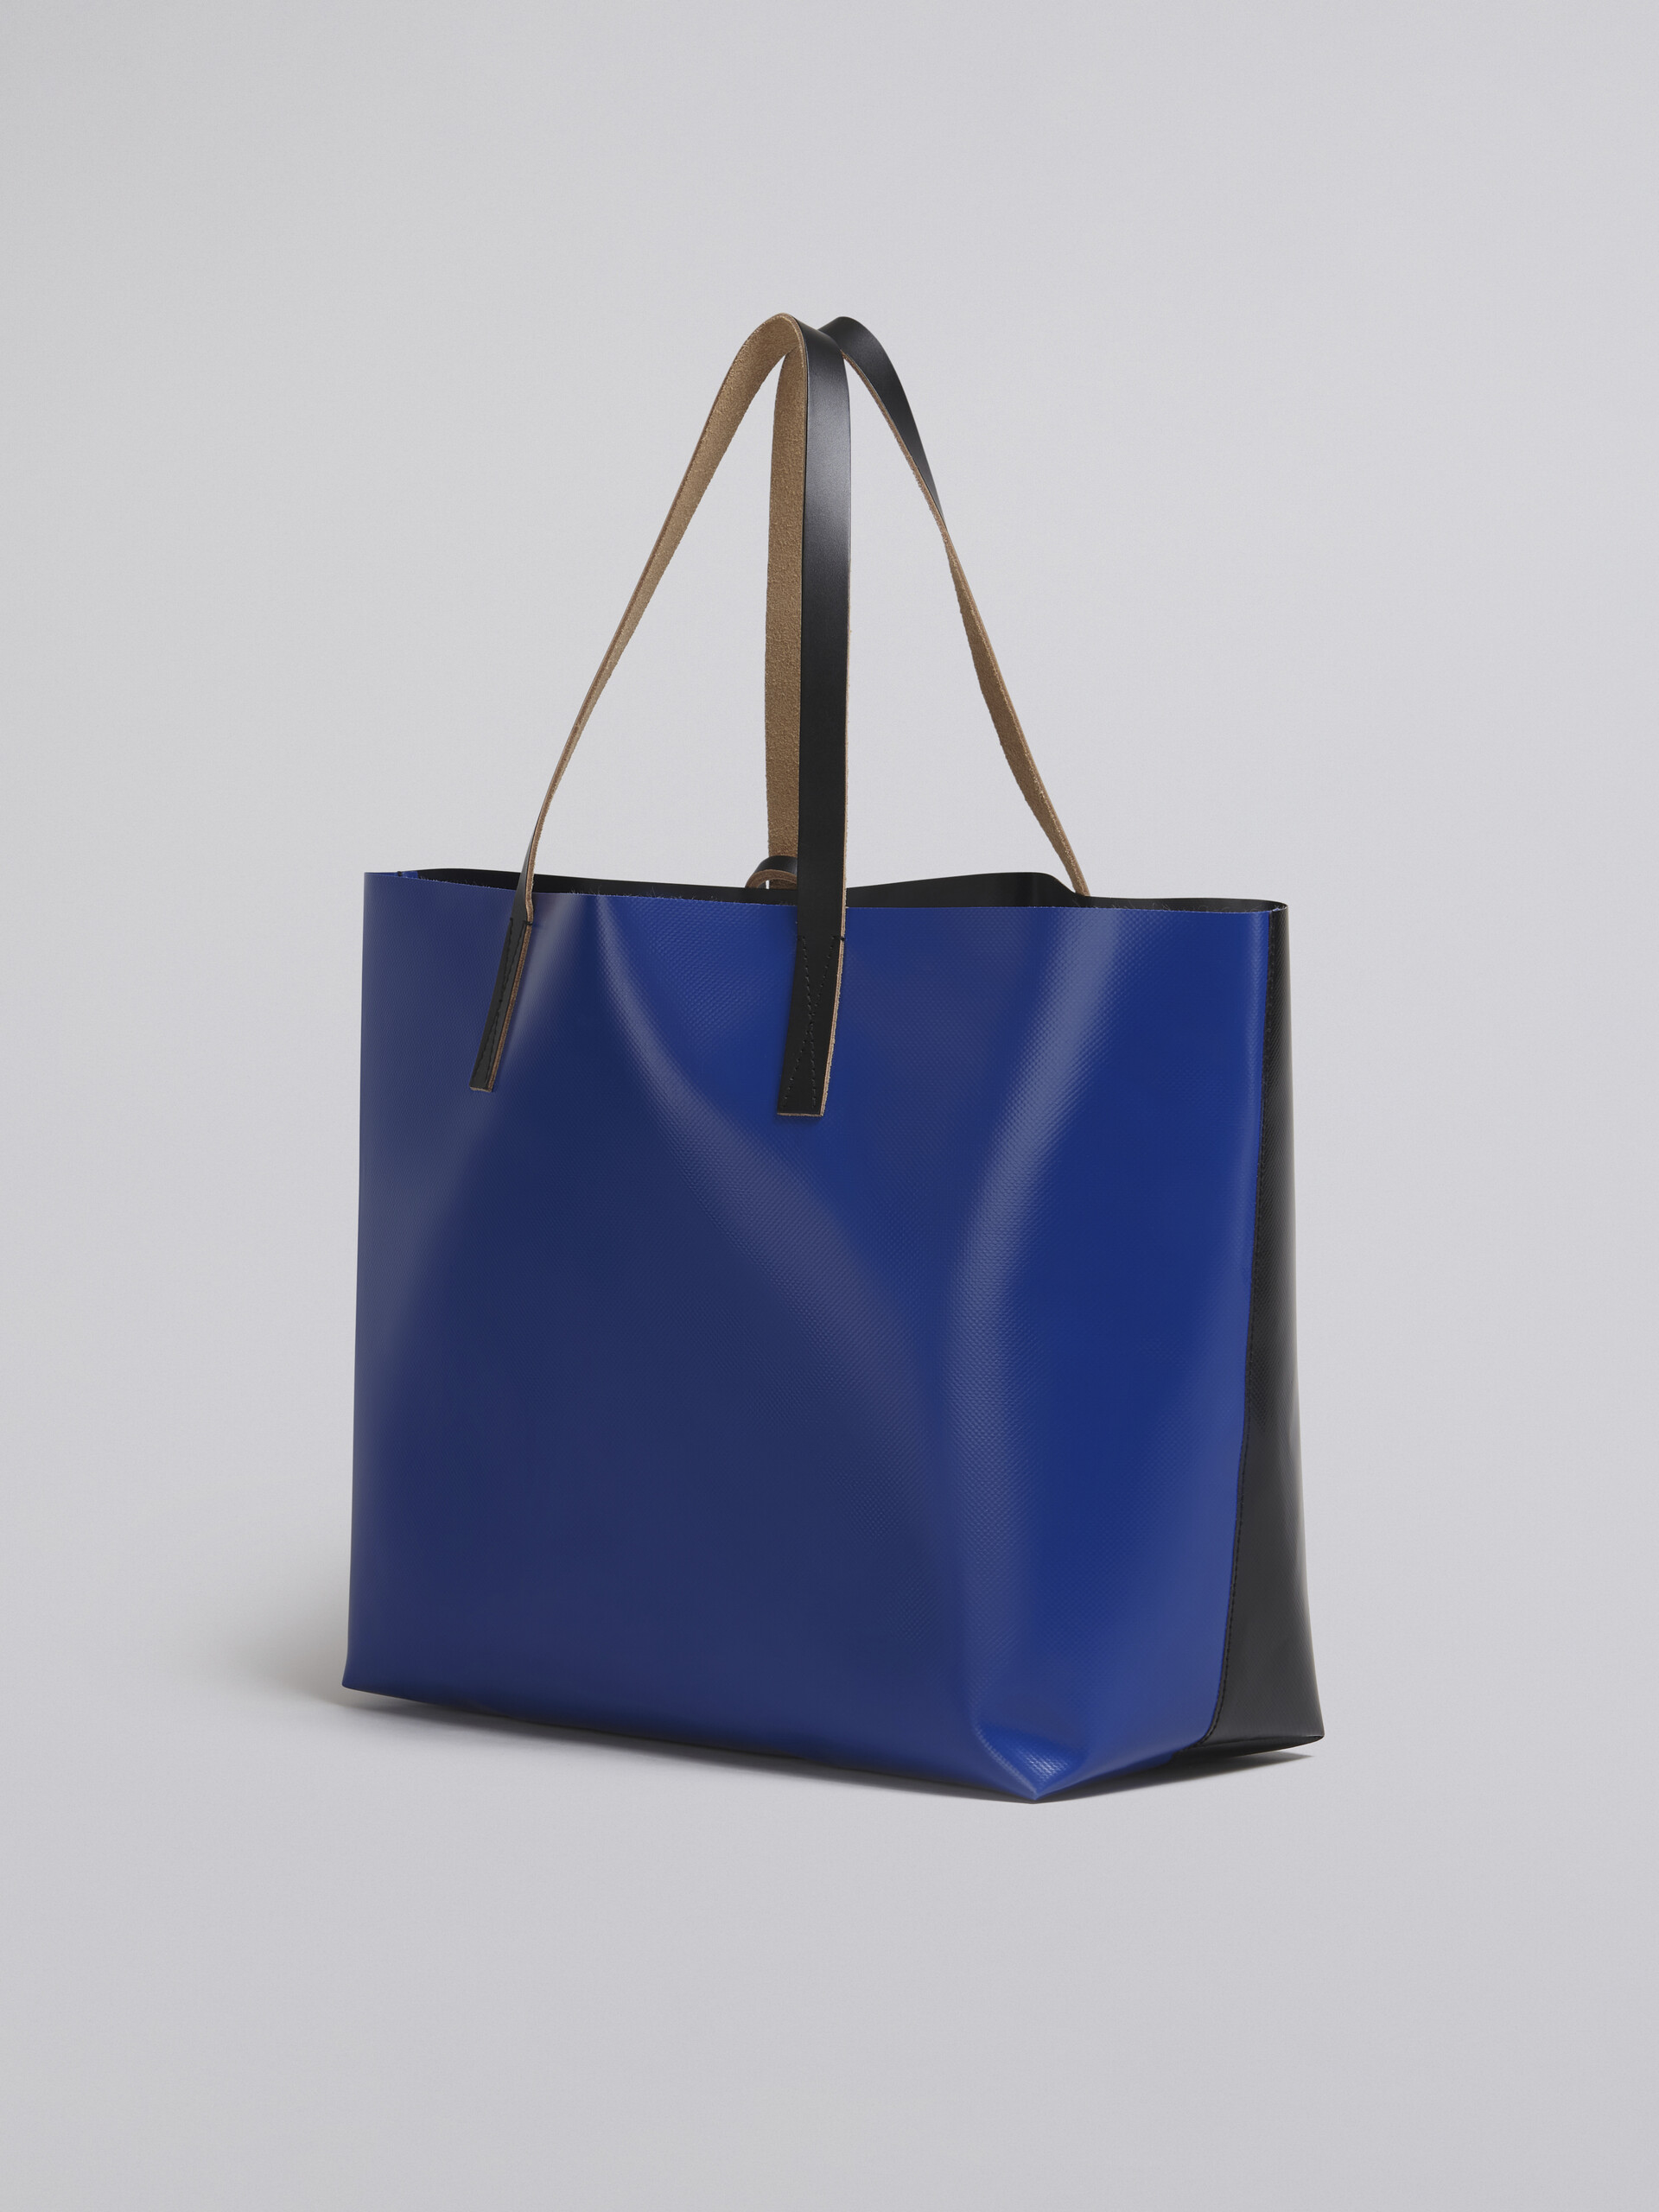 Black and blue TRIBECA shopping bag - Shopping Bags - Image 2